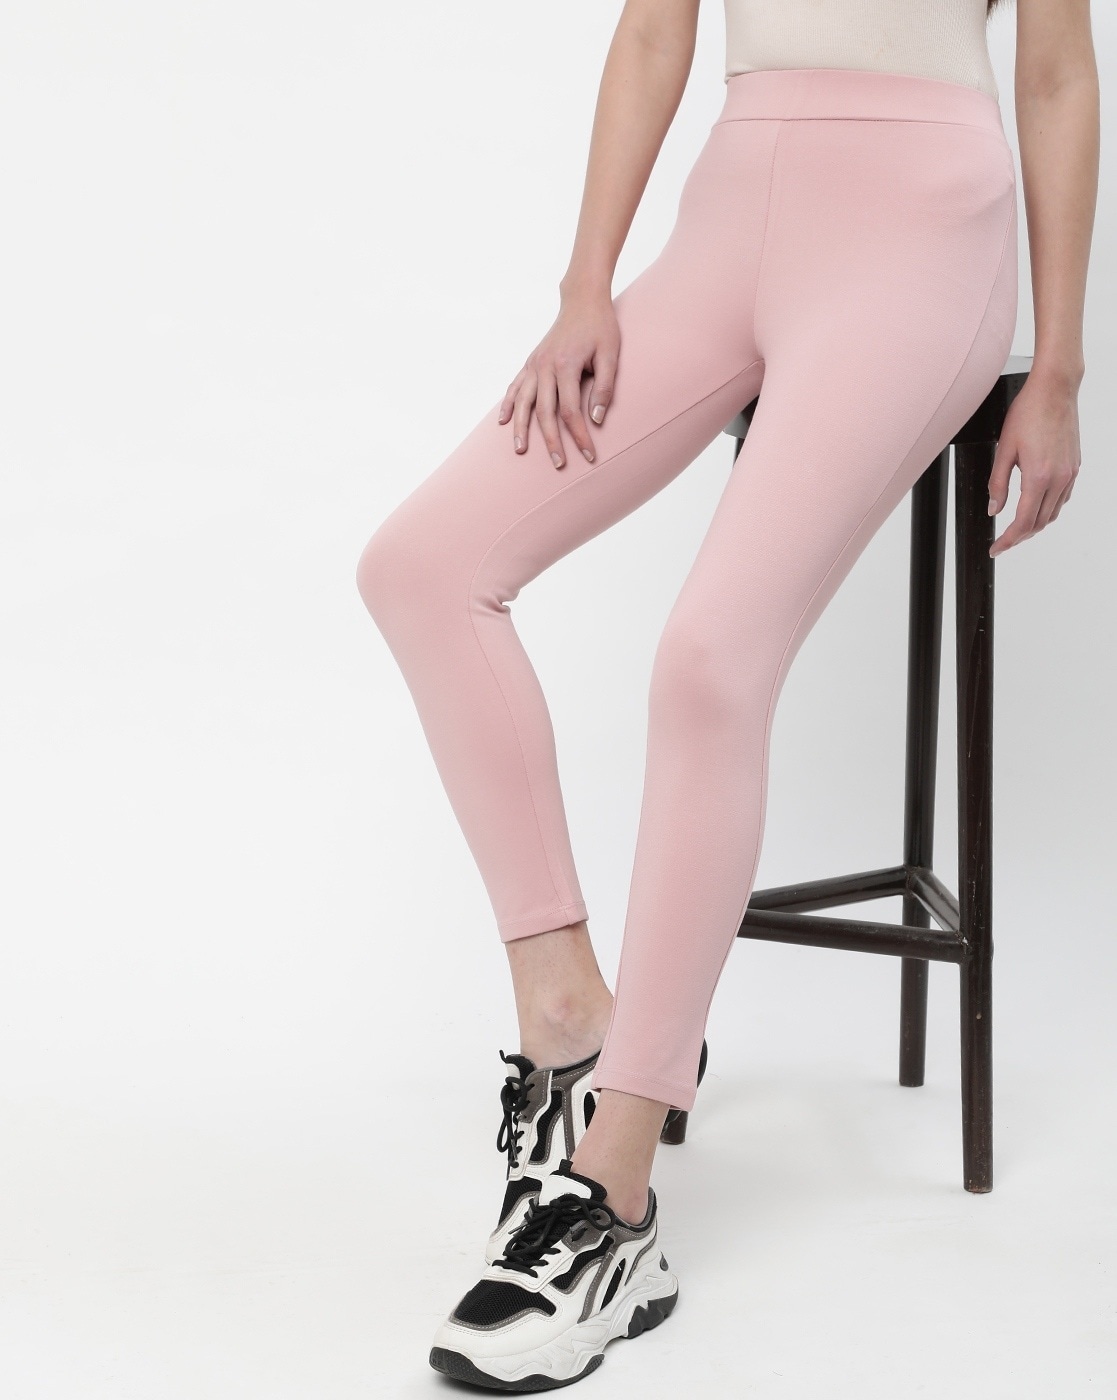 CANOAN Tropical Soft Pink Heart Shaped Leggings - TIGHTBUNZ